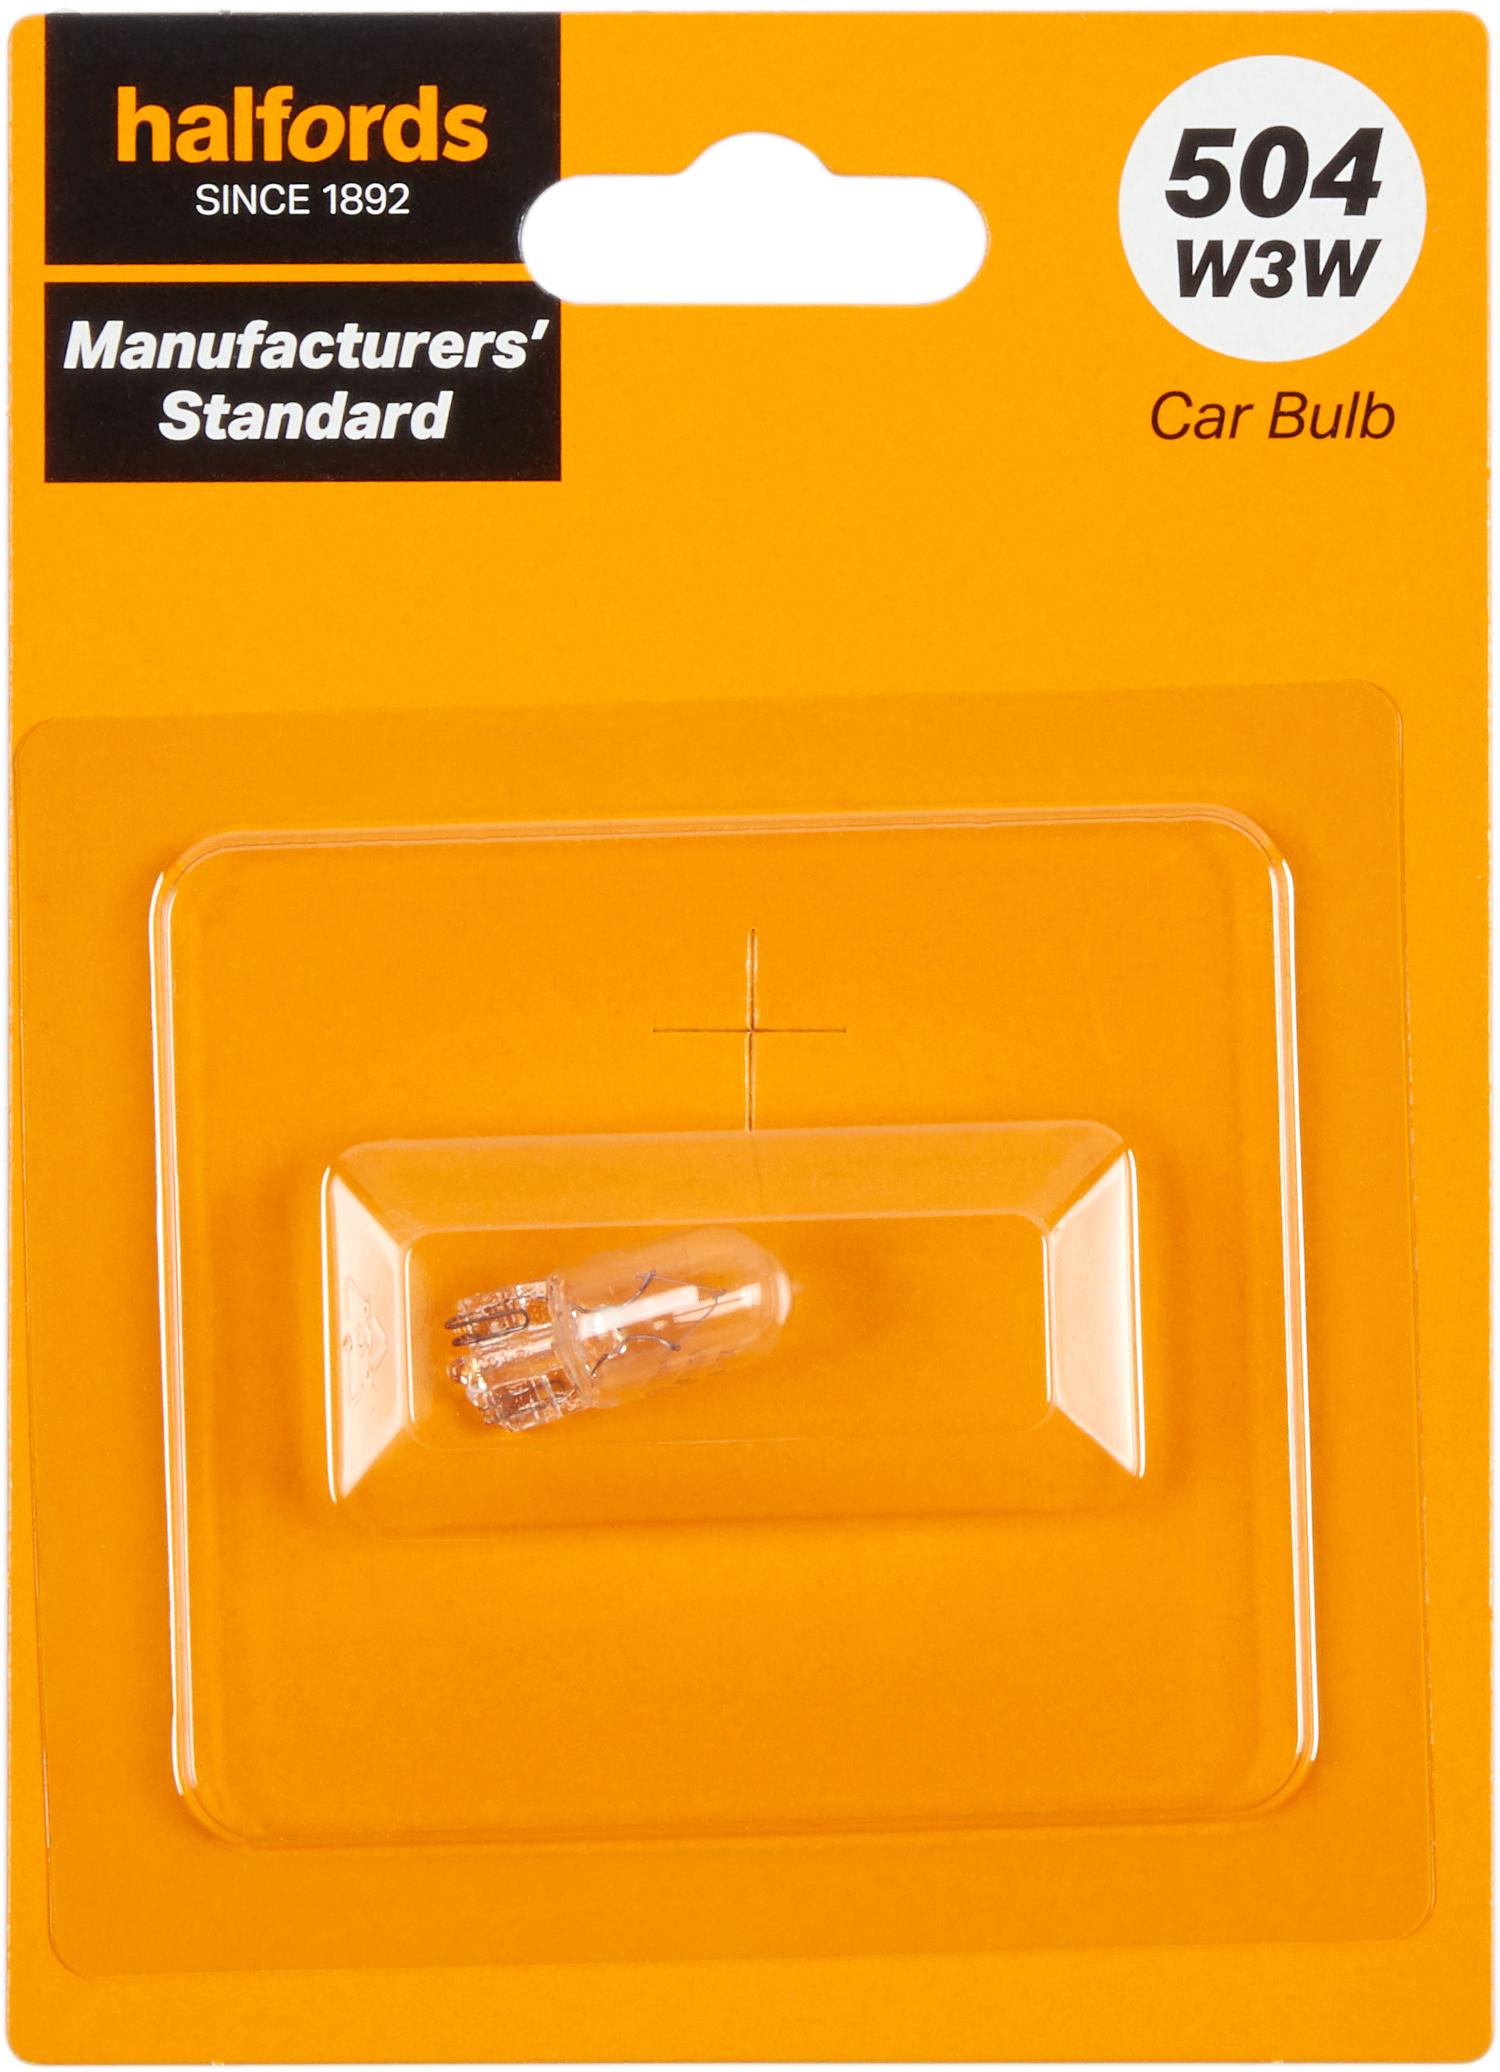 504 W3W Car Bulb Manufacturers Standard Halfords Single Pack